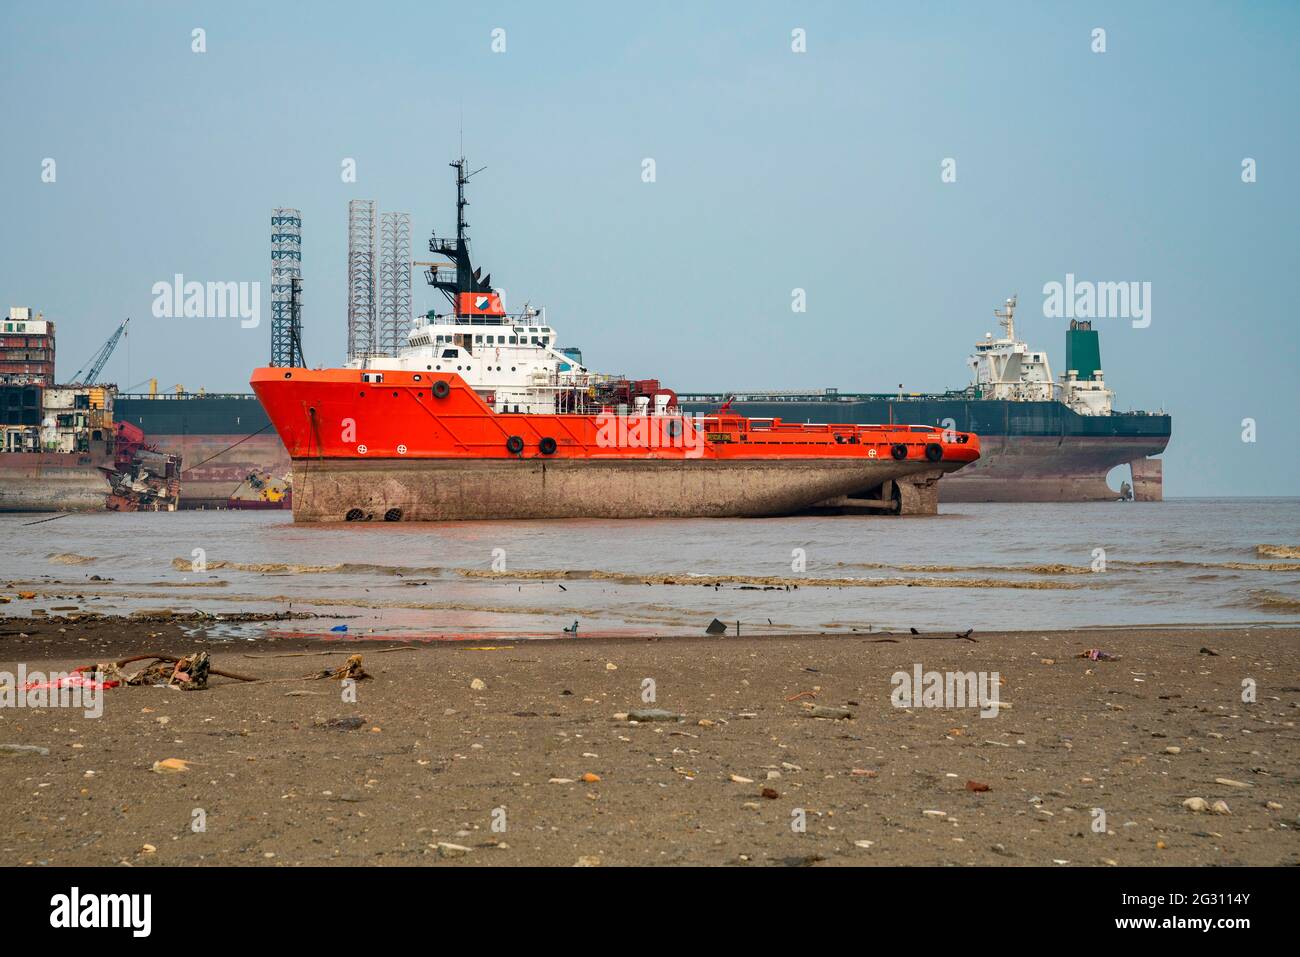 Alang ,01, February, 2016:Small red boat and large ship brought to Alang Ship Breaking Yard for scrapping and marine salvage Bhavnagar, Gujarat,India Stock Photo